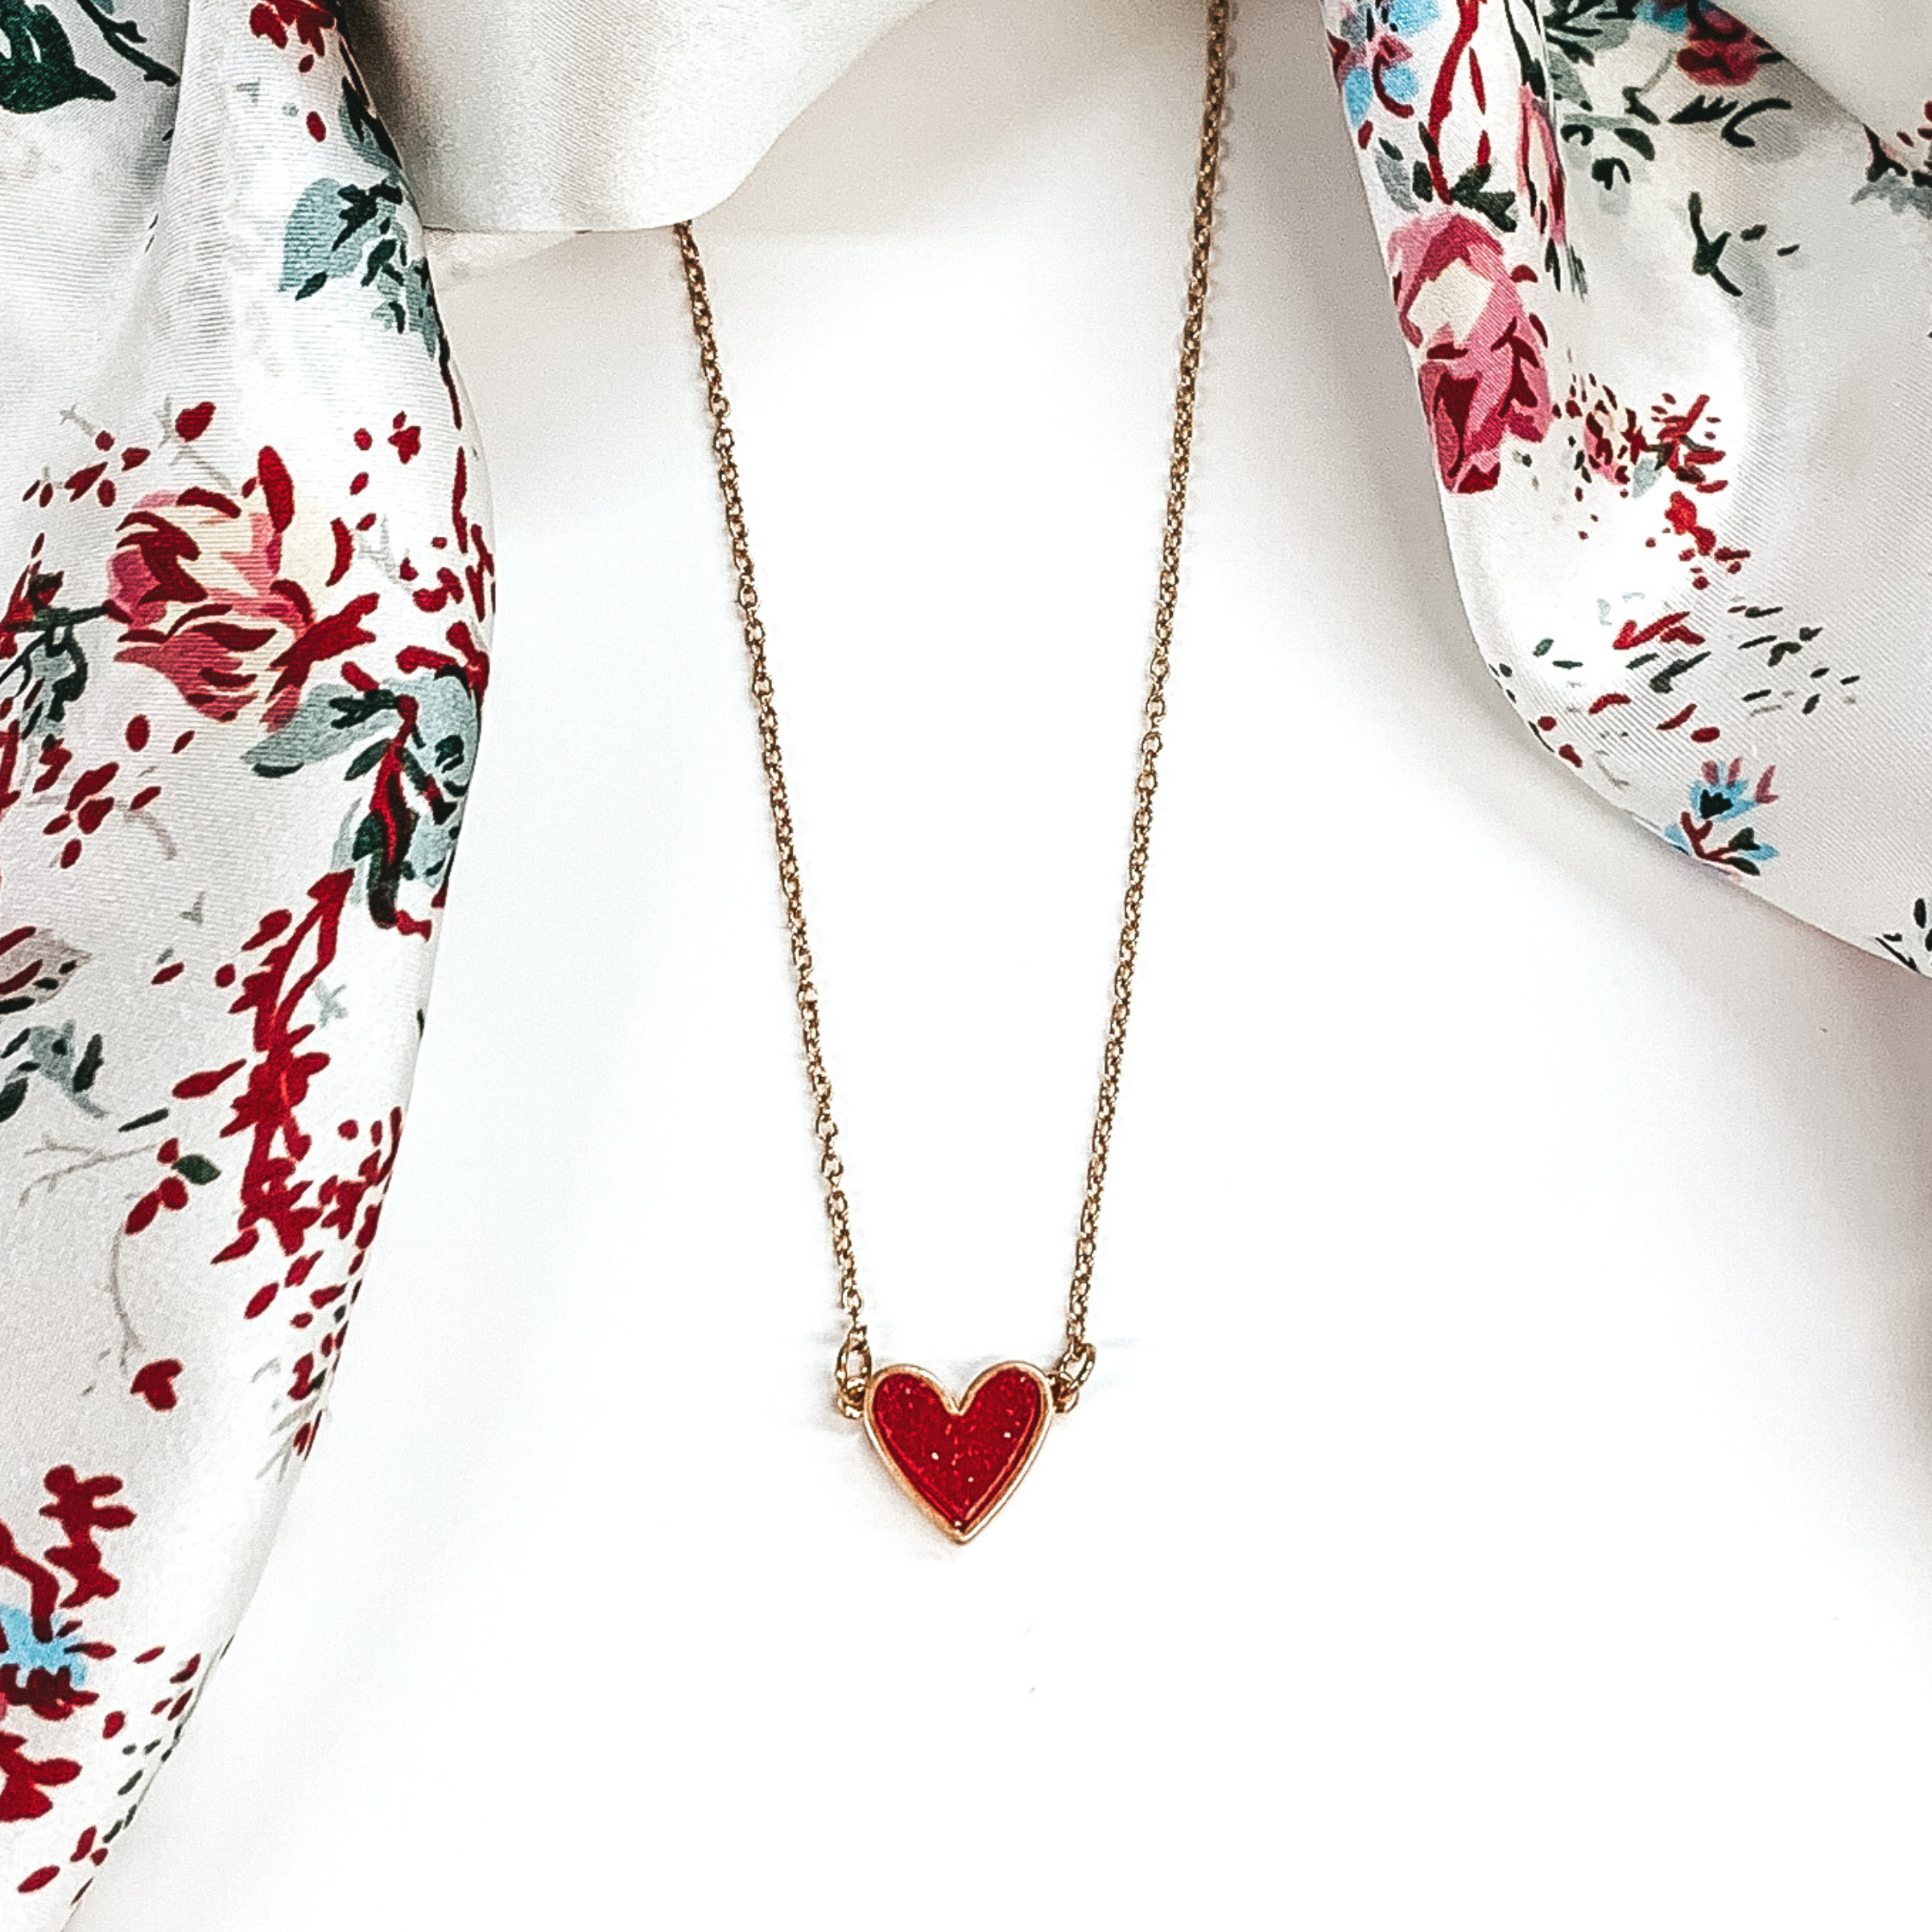 Druzy Heart Necklace in Red - Giddy Up Glamour Boutique